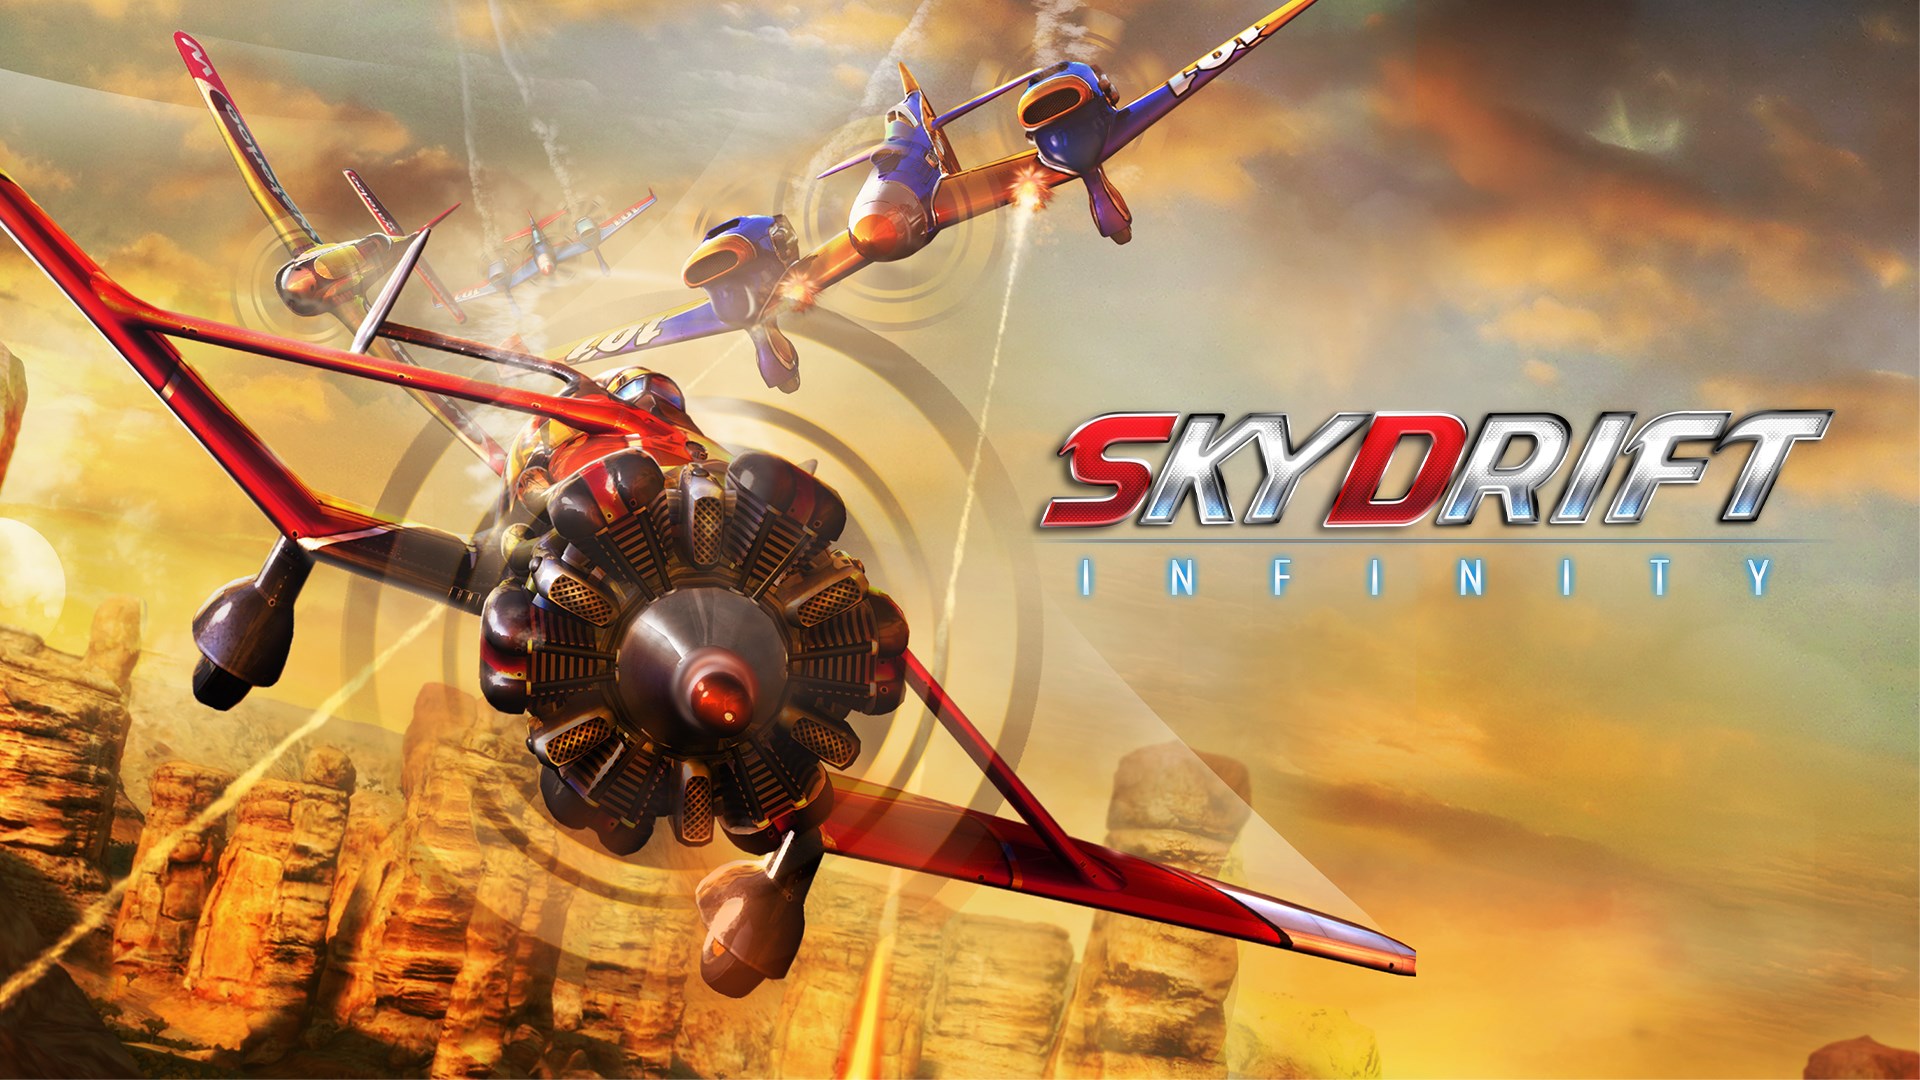 Video For Skydrift Infinity Is Now Available For Xbox One And Xbox Series X|S